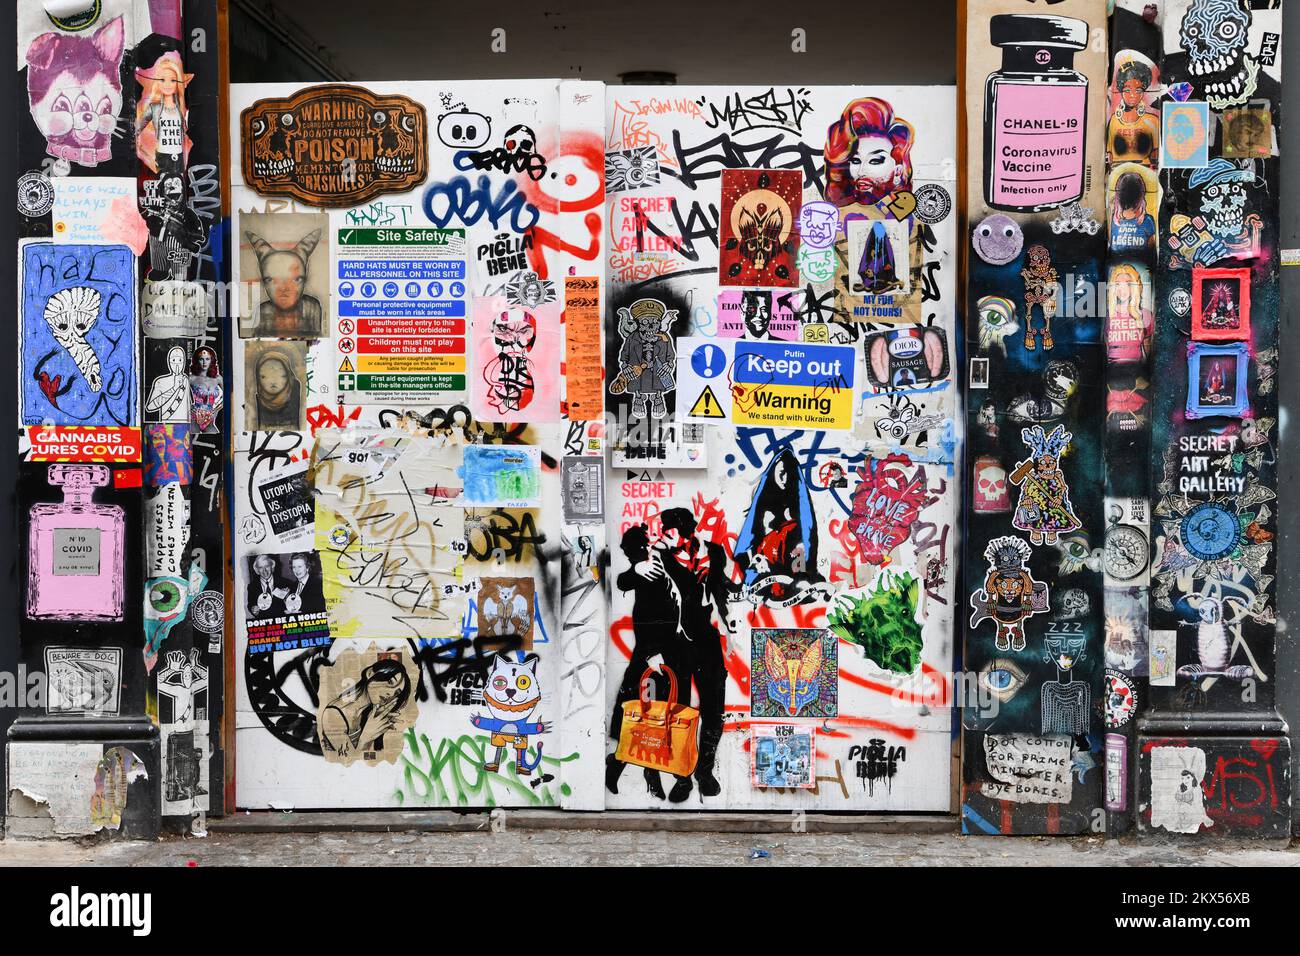 gates covered in graffiti, paste-ups, stickers and posters on Cheshire Street, Shoreditch, London Stock Photo